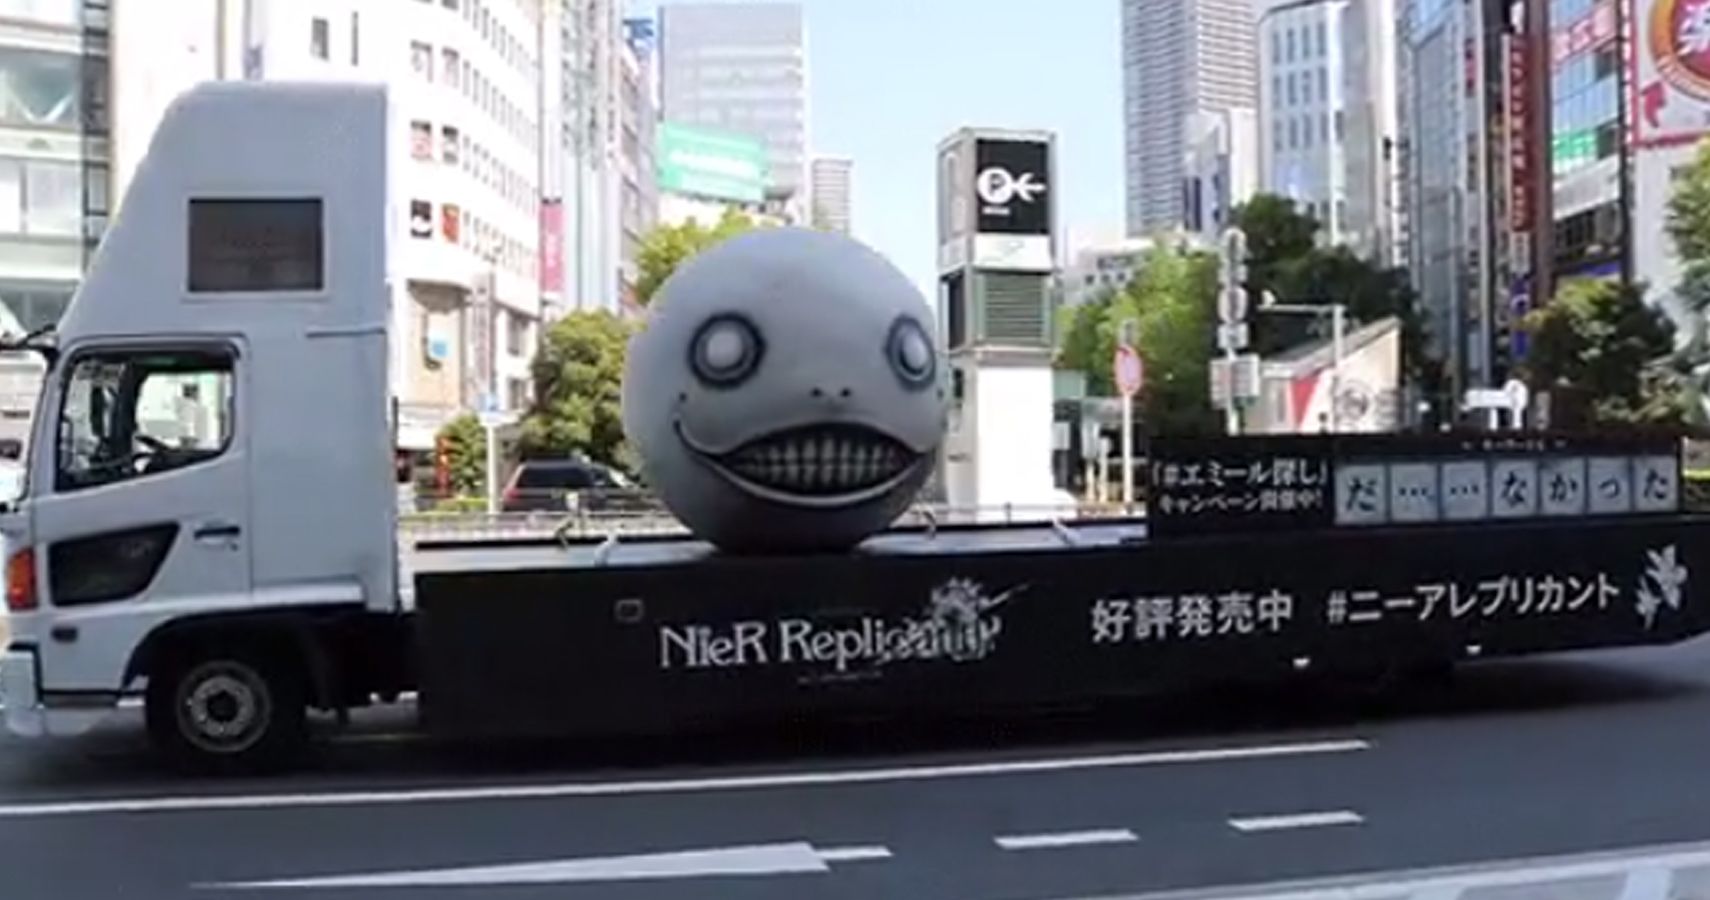 Emil's Head on a truck roaming around Japan for a Nier Replicant promotion